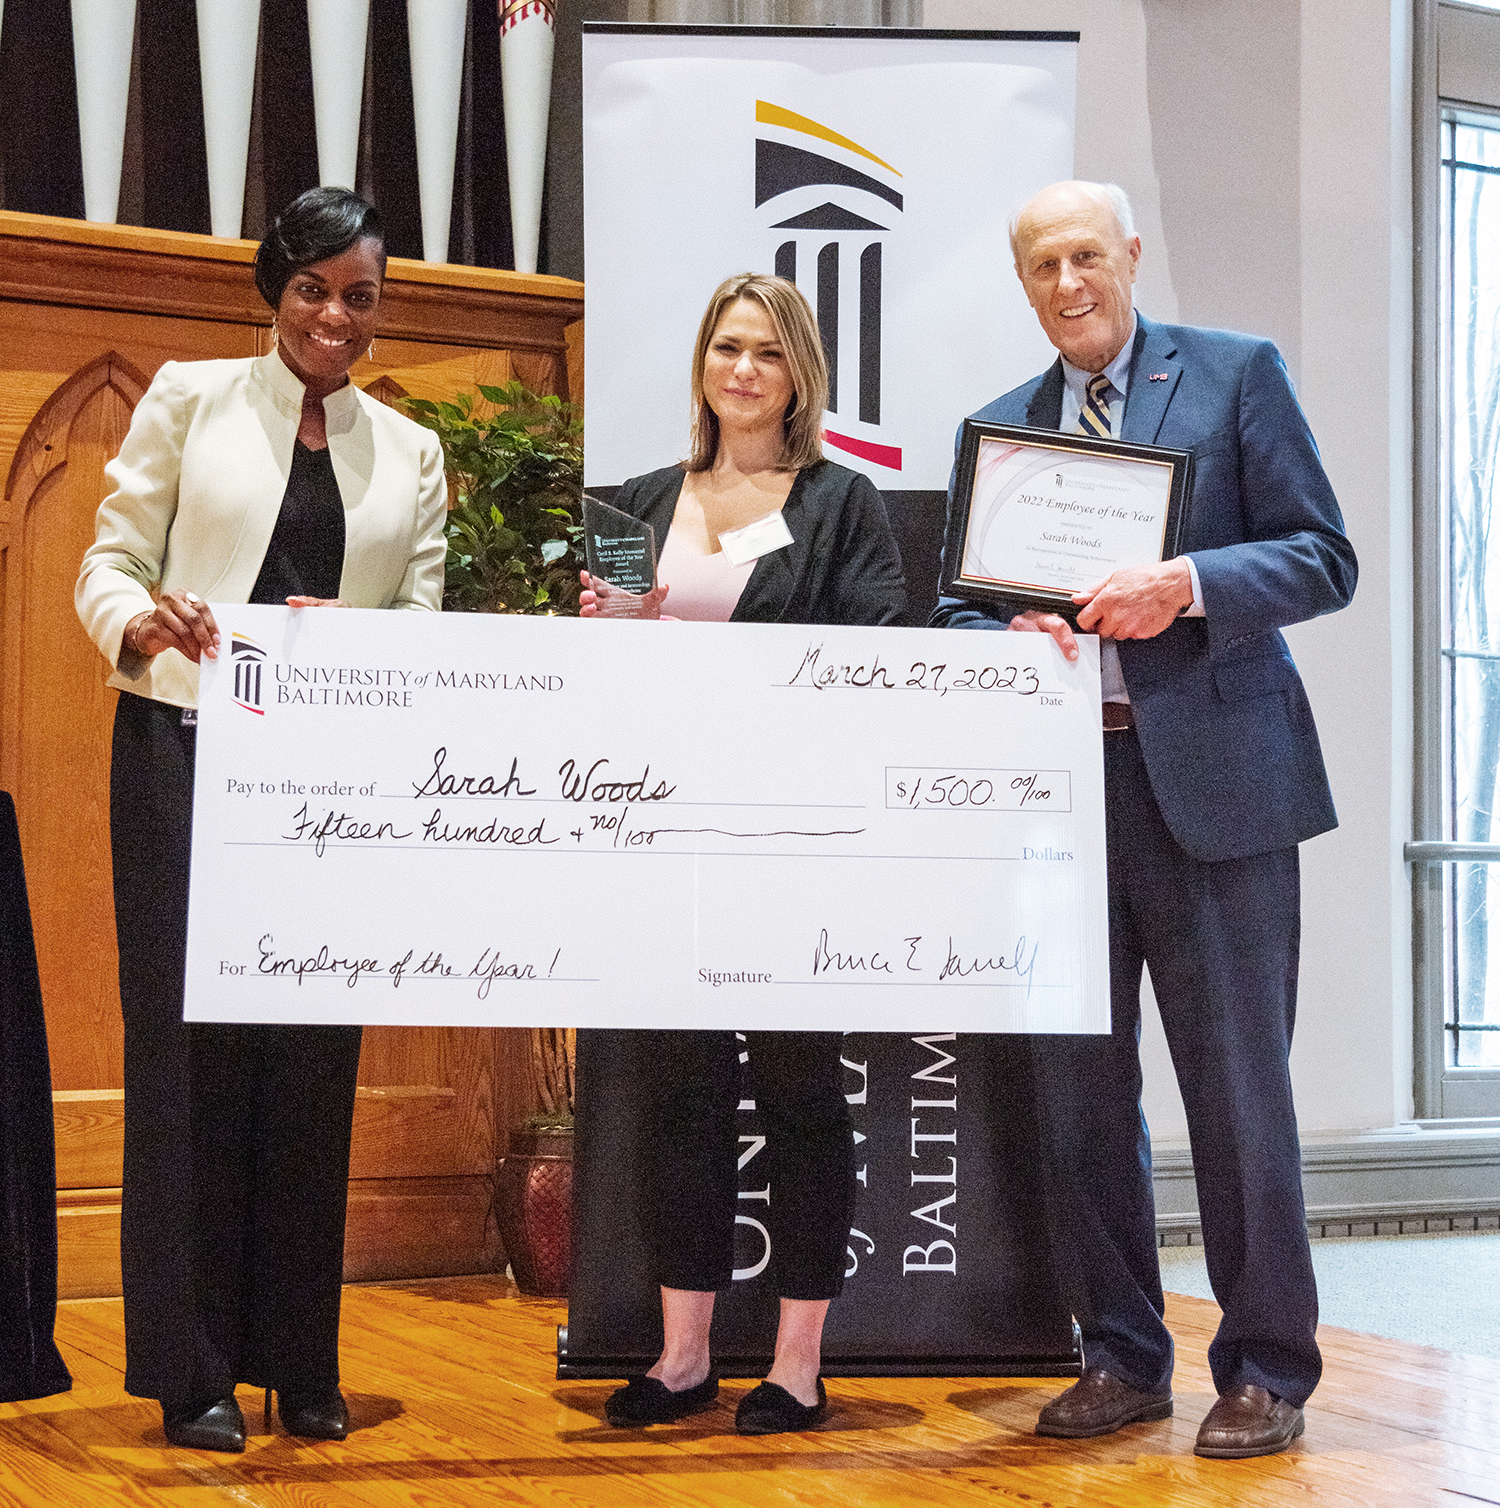 Sarah Woods, center, poses with UMB Chief Human Resources Officer Malika Monger and President Bruce Jarrell after being named Employee of the Year.